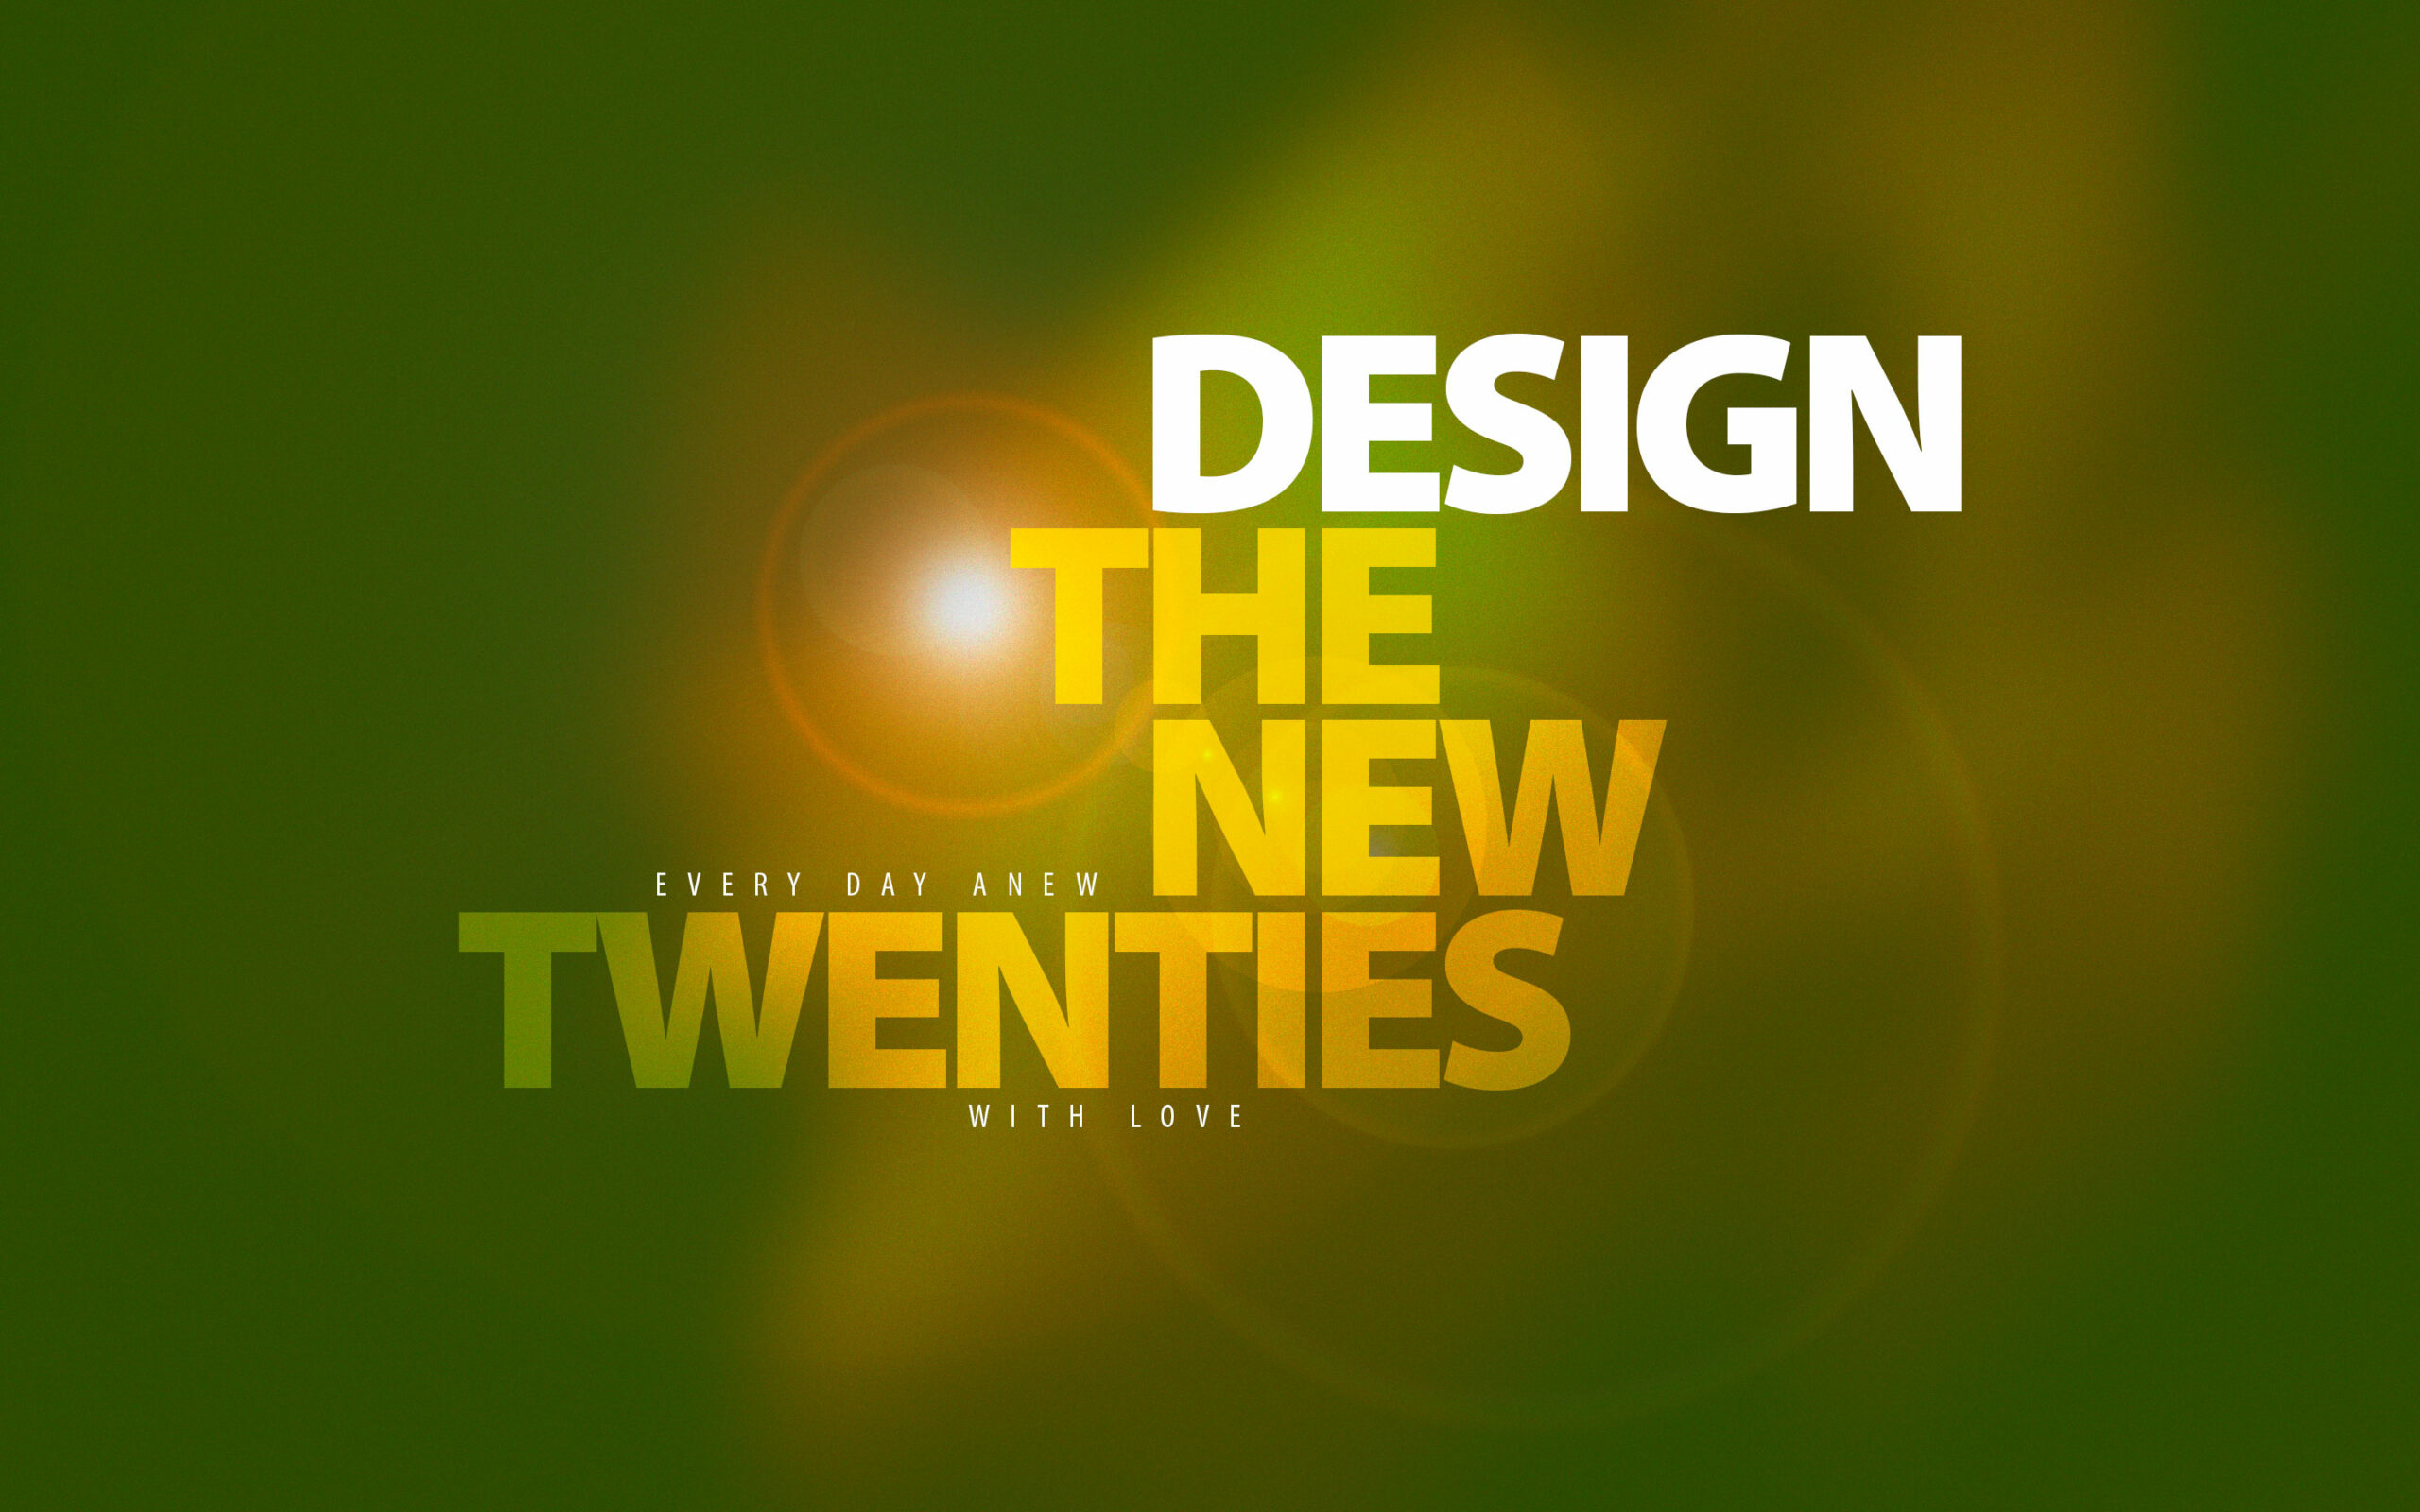 Design the New Twenties – Every day anew with Love (green)